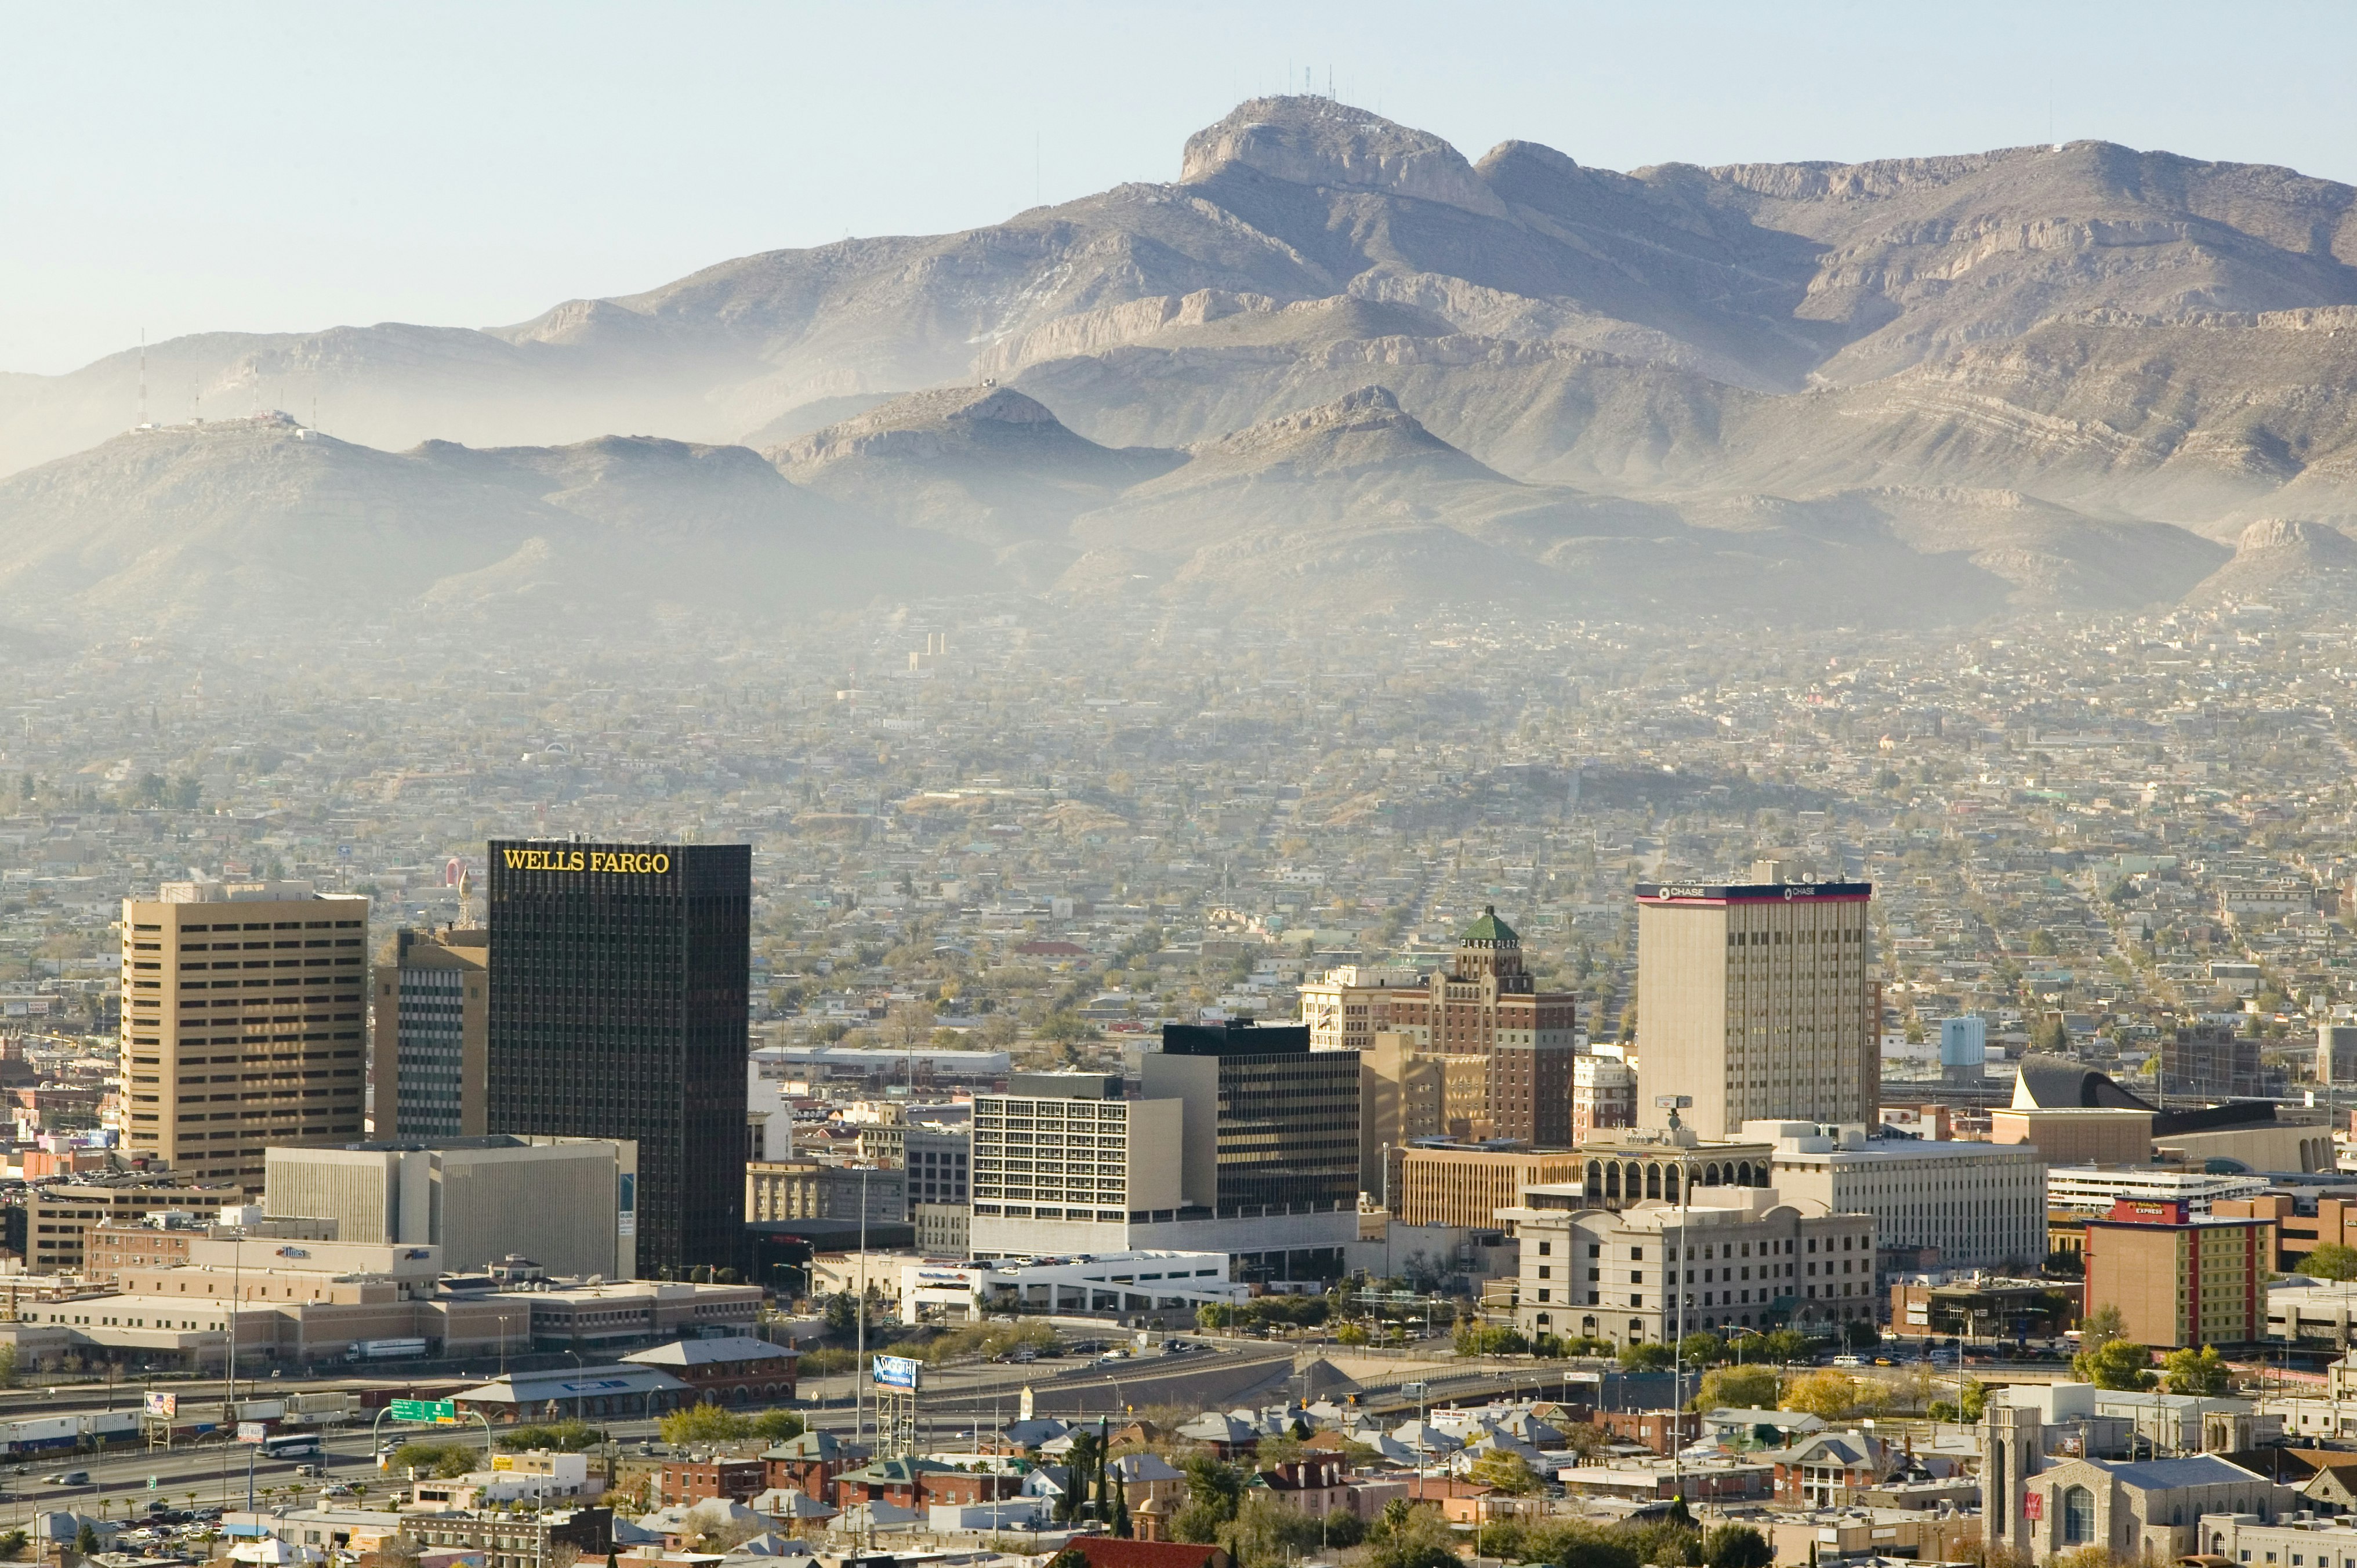 The El Paso, Texas, skyline, with mountains in the background